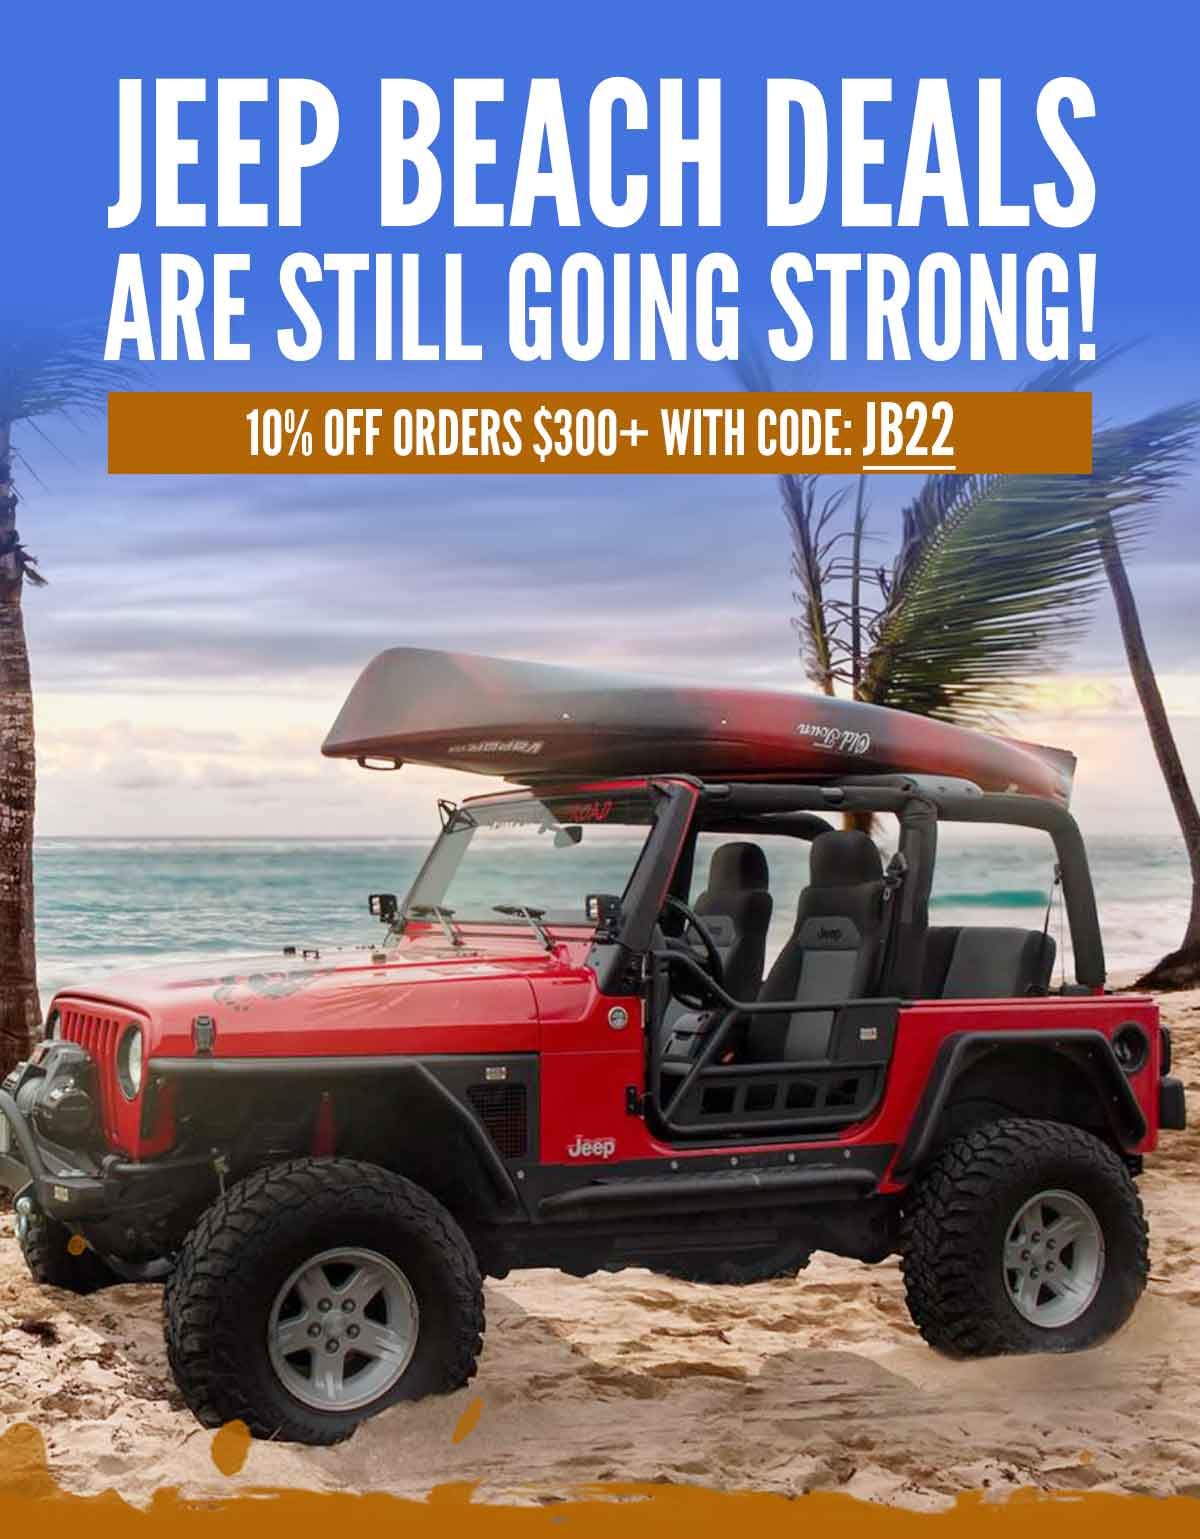 Jeep Beach Deals Are Still Going Strong! Enjoy Exclusive Savings Only At Morris 4x4 Center!